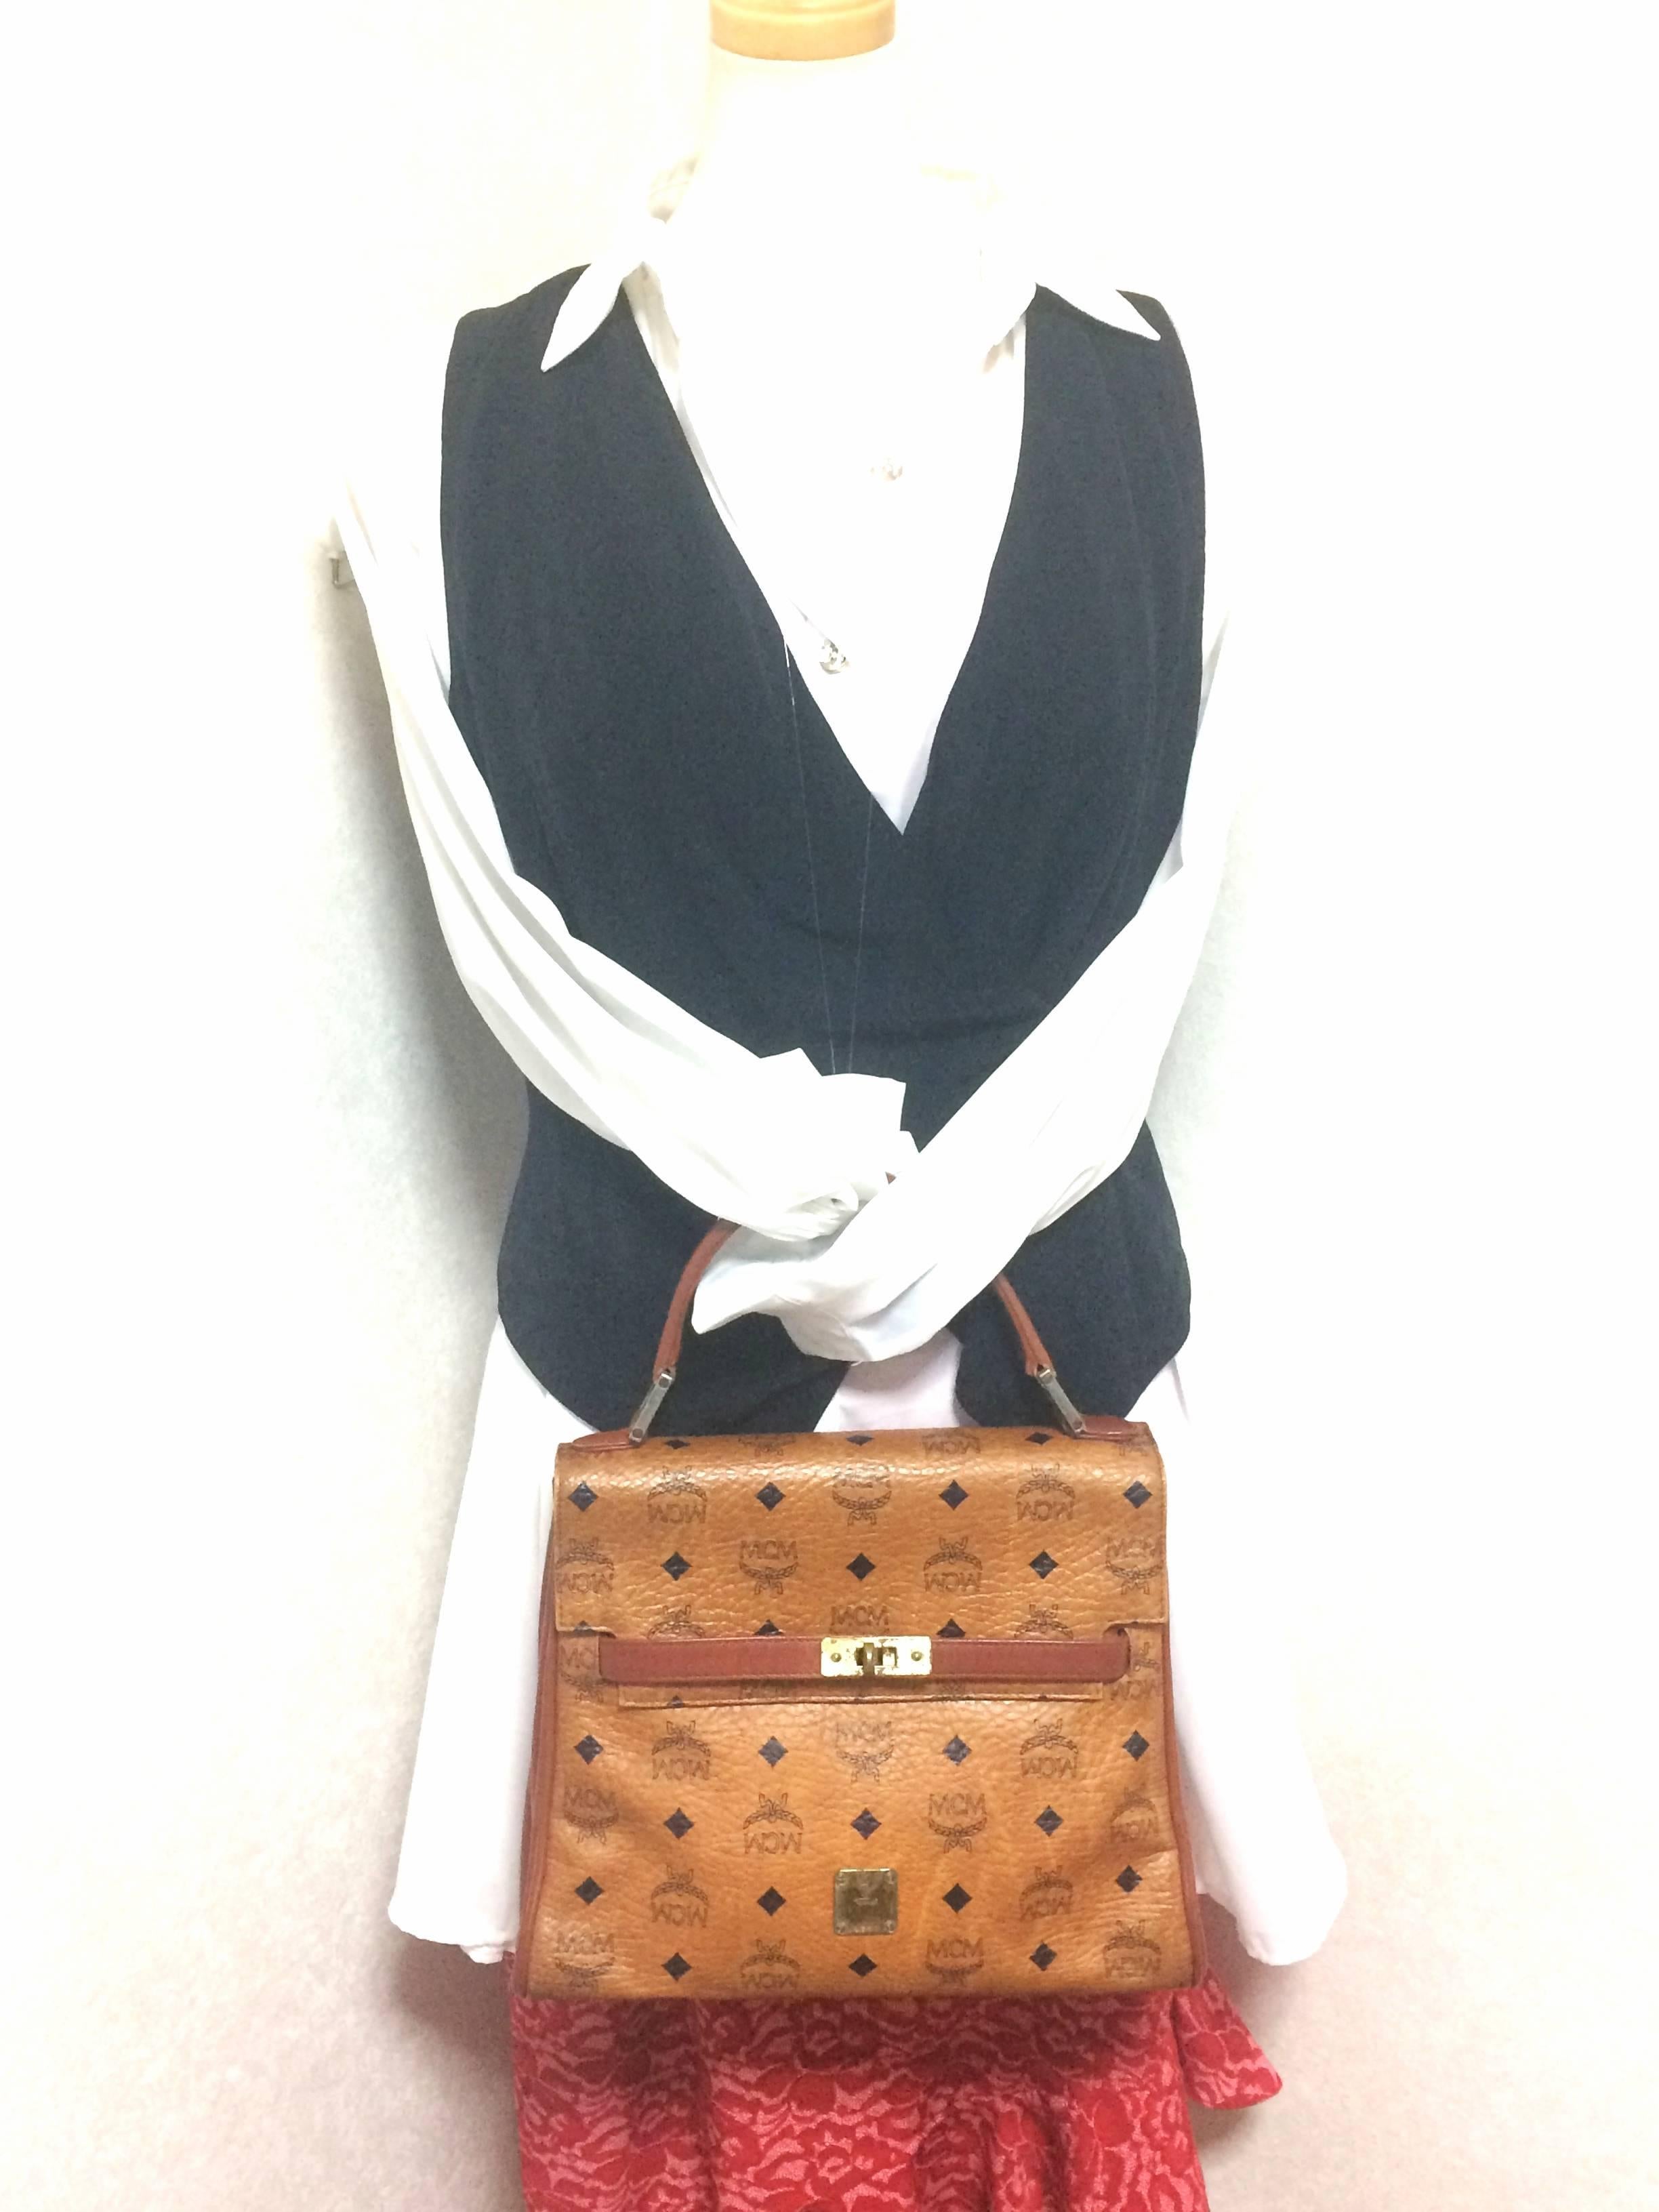 Vintage MCM Kelly style bag with golden logo plate in classic brown monogram. 3